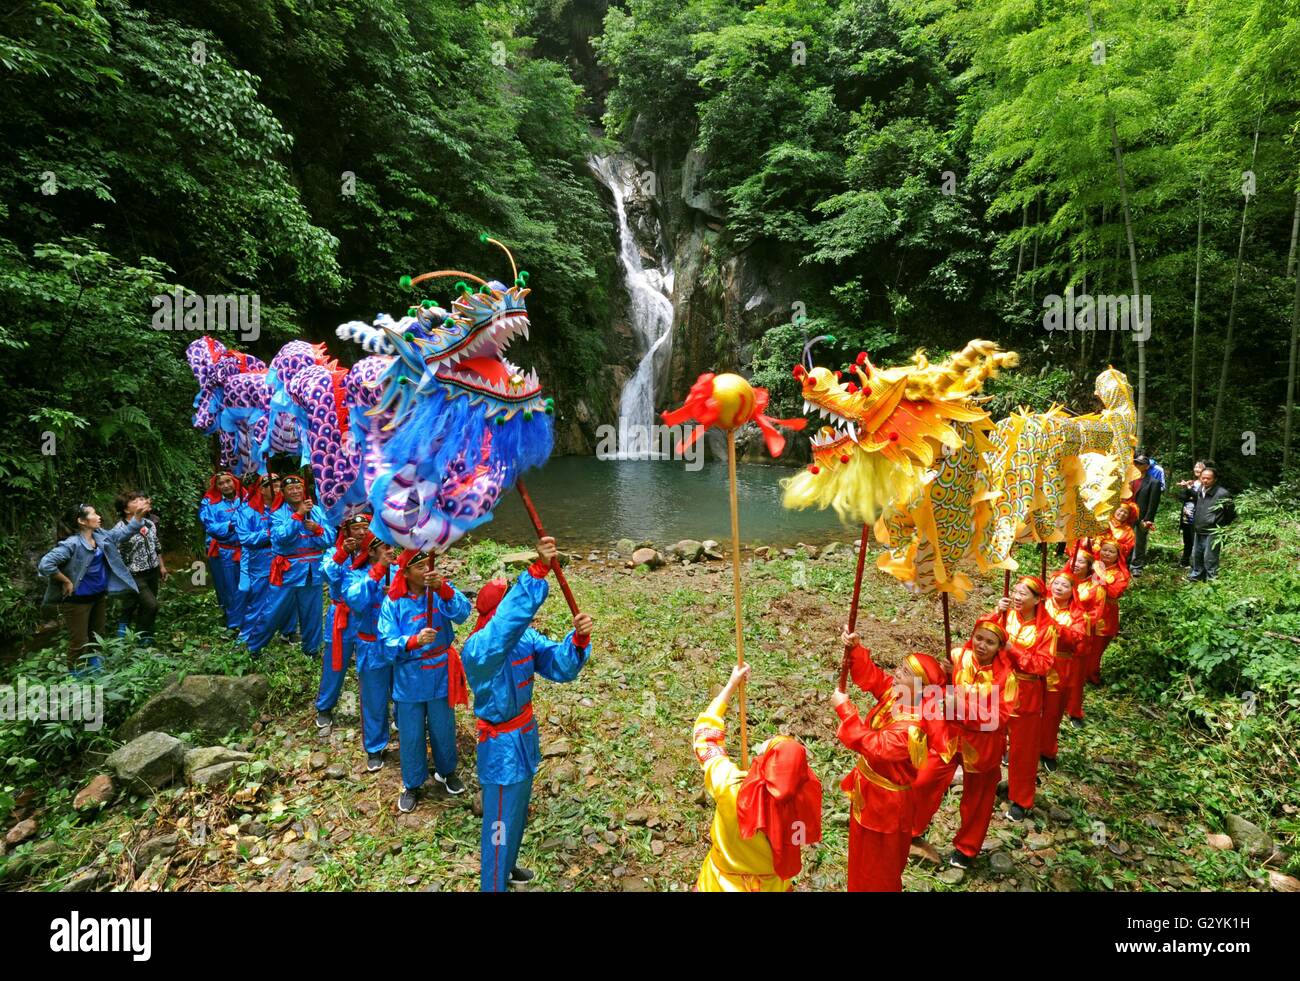 (160605) -- ANJI, June 5, 2016 (Xinhua) -- Farmers rehearse dragon dance at a tourist spot in Anji County, east China's Zhejiang Province, June 4, 2016. Anji is known for its pleasant environment with flourishing bamboo plantations and many scenes from the famous movie 'Crouching Tiger, Hidden Dragon' were shot here. The county persists in green, low-carbon development, and strives to protect environment as well as to develop local economy. June 5 is observed as World Environment Day every year, and this year's theme issued by China's Ministry of Environment Protection is 'improving the qualit Stock Photo